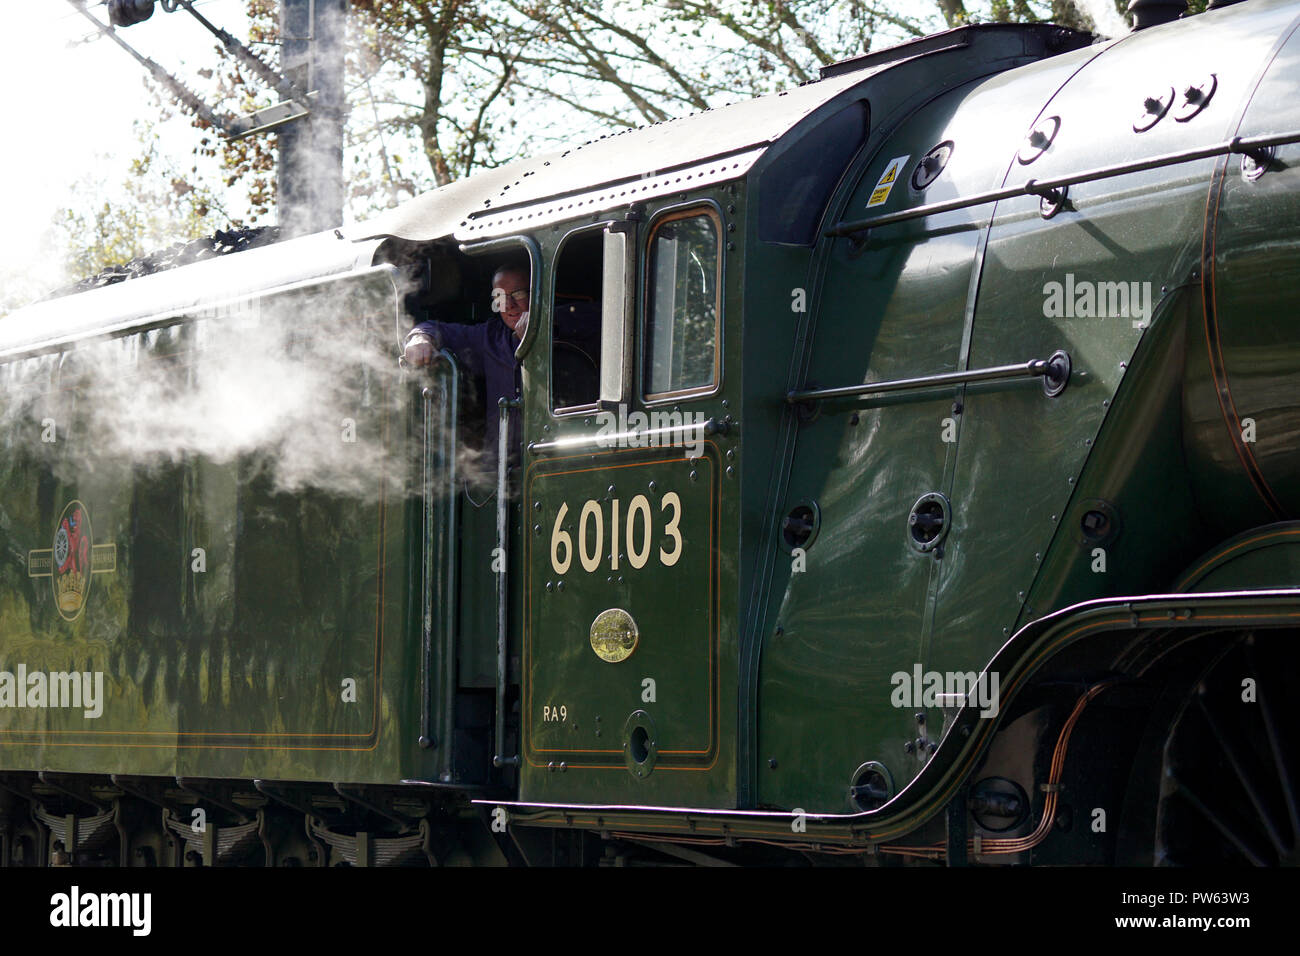 The Fireman on the footplate of Flying Scotsman as she leaves a siding on the East Coast Mail Line, having stopped to take on water during an excursion planned as a memorial to Alan Pegler, the man who saved the locomotive from the scrap yard in 1963.  Pictured here a few miles after the section at Sutton Bank where she secured the land speed record at 100mph in 1934 and where during the memorial run Alan Peglar's ashes were committed to the firebox. Stock Photo